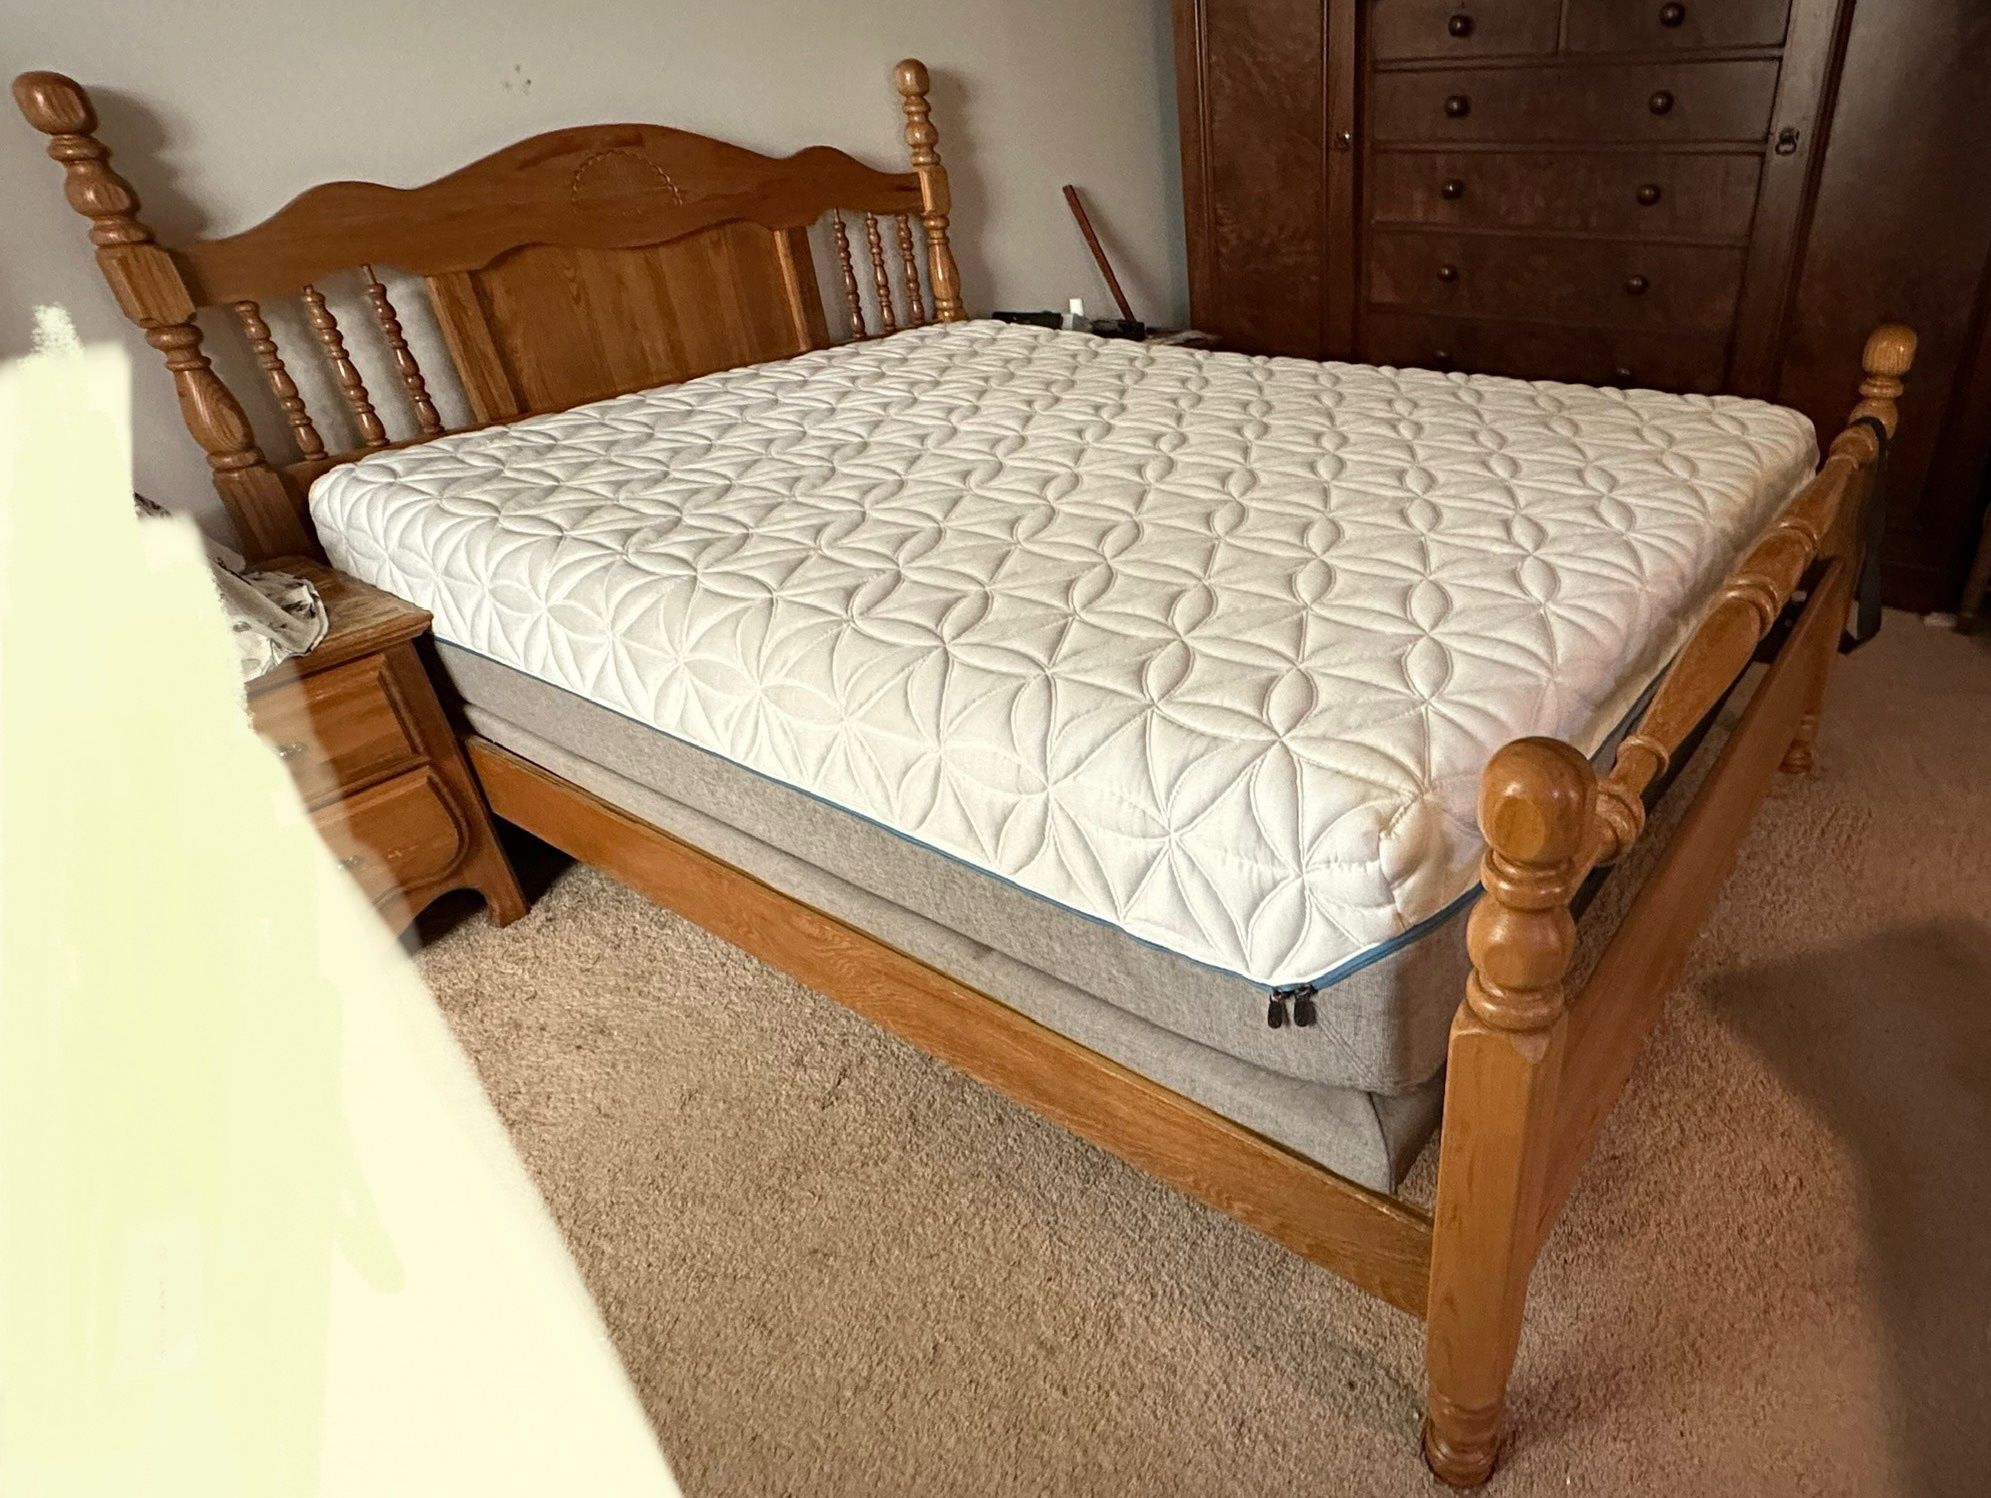 **Queen-sized Tempur-Pedic TEMPUR-Cloud Elite with electric-powered adjustable base and bed frame included for $2000 obo**